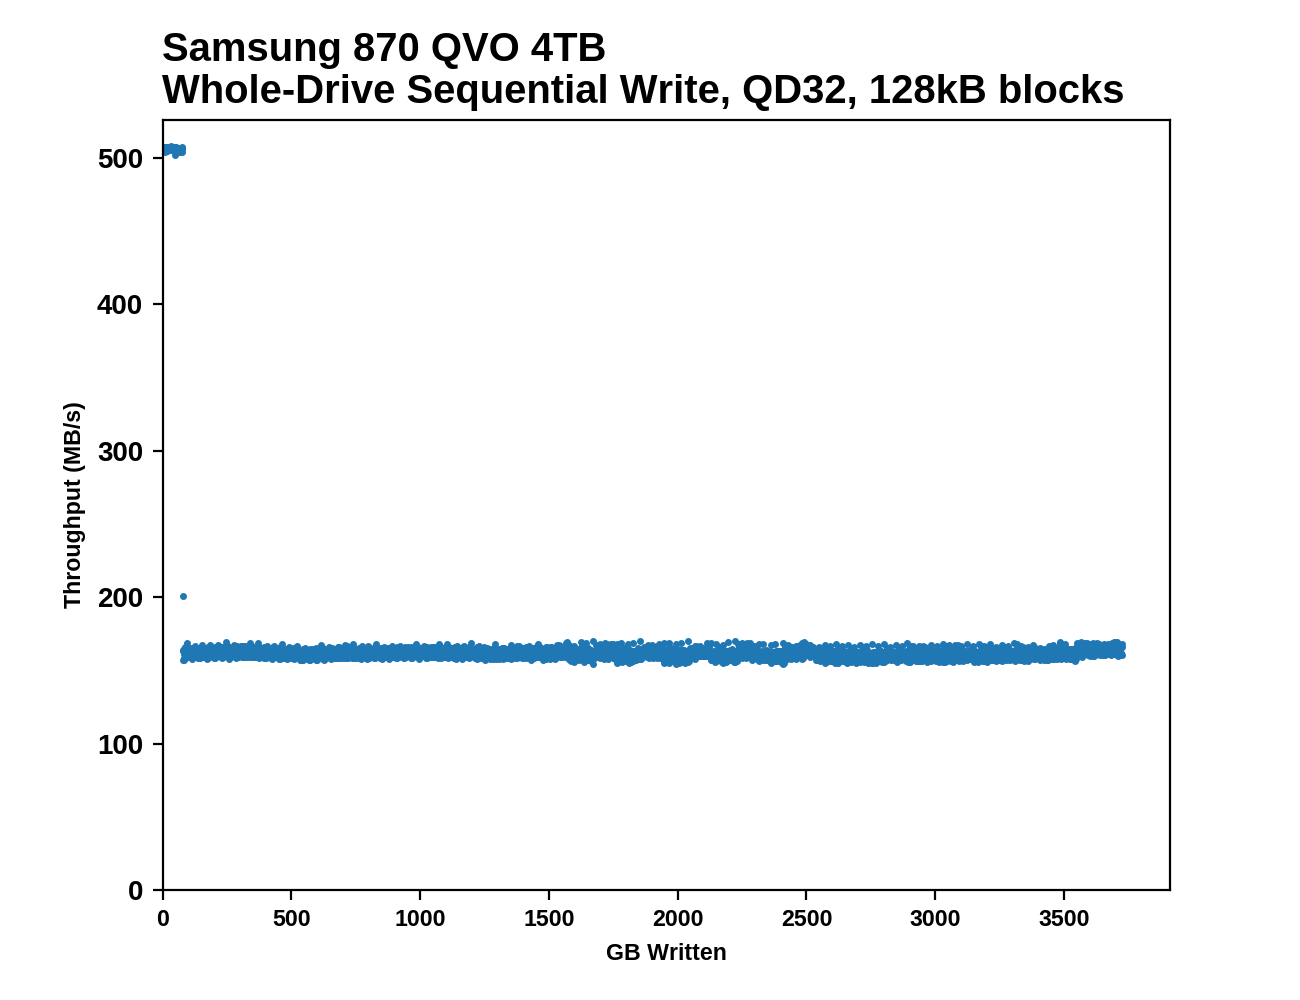 Samsung 870 QVO 1 TB Review - Terrible, Do Not Buy